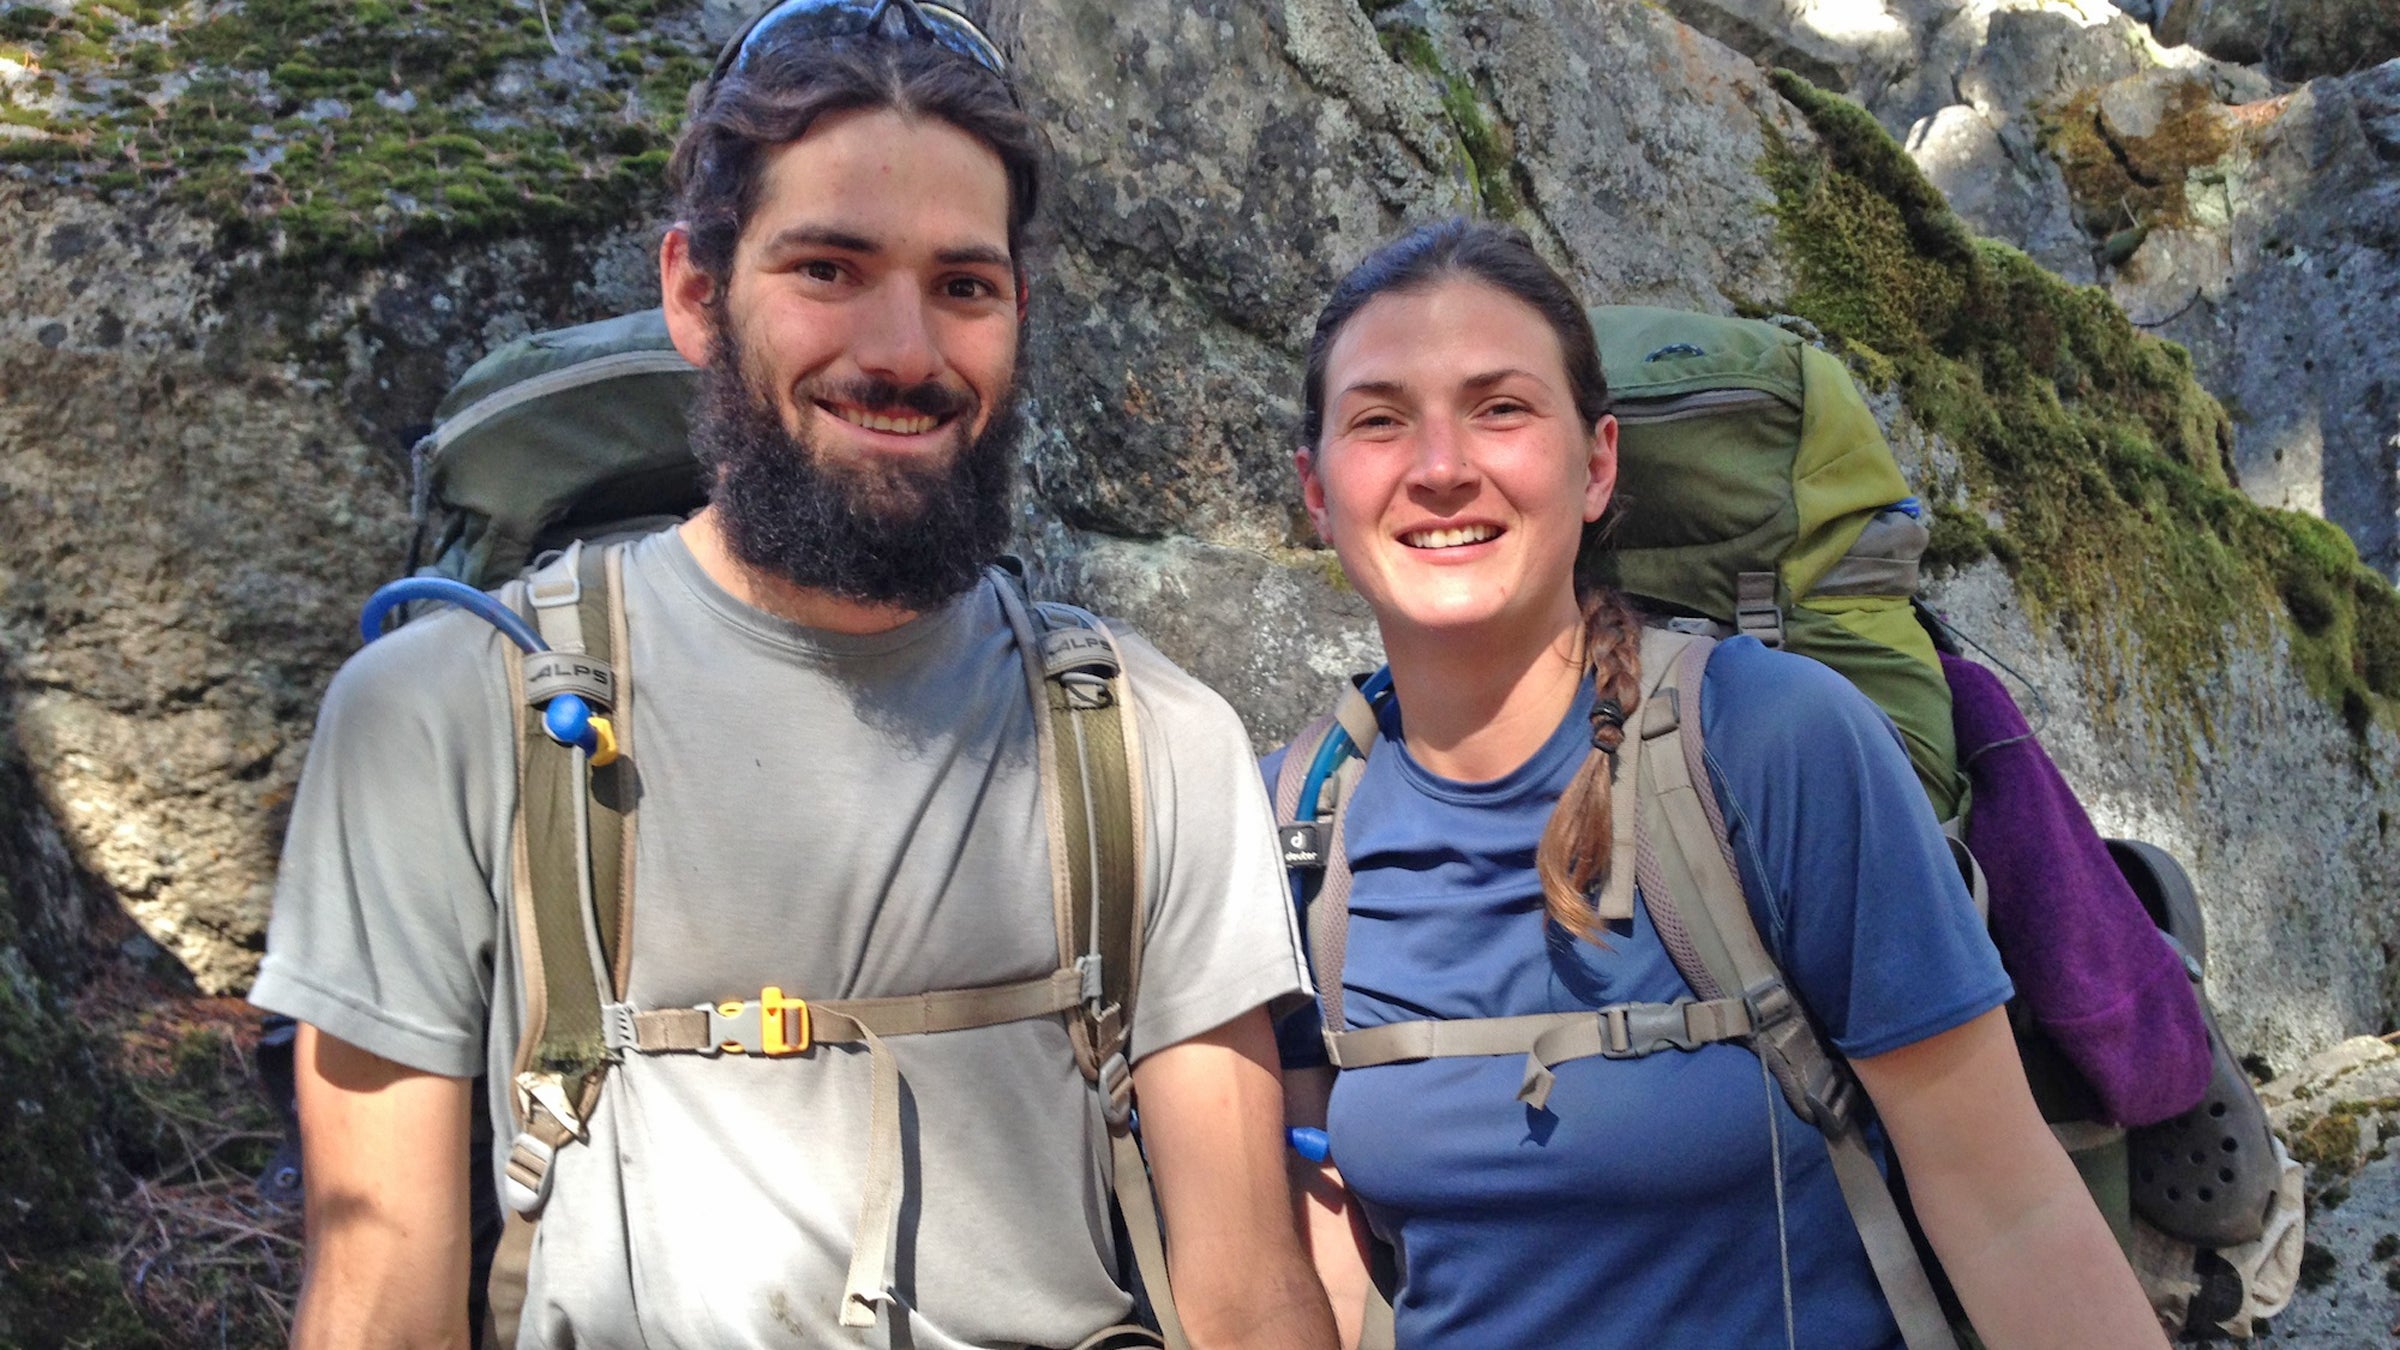 Rico Colomb (left) and Mandy Torres, 26 and 32
Trail Names: Cup and Ladybug 
Windsor, California

Ladybug: “Hiking over the passes in the Sierras was a lot scarier than I thought it was going to be. Before the trip, I thought that if I got stung by a bee, I’d die, but I got stung twice by a bee and I am still here!”

Cup: “I learned I’m capable of going through a lot more misery than I thought I was. I can hike a lot farther in a day than I thought. Biggest day was 29 miles. At the start I did a 14-mile day and thought I was going to die.”